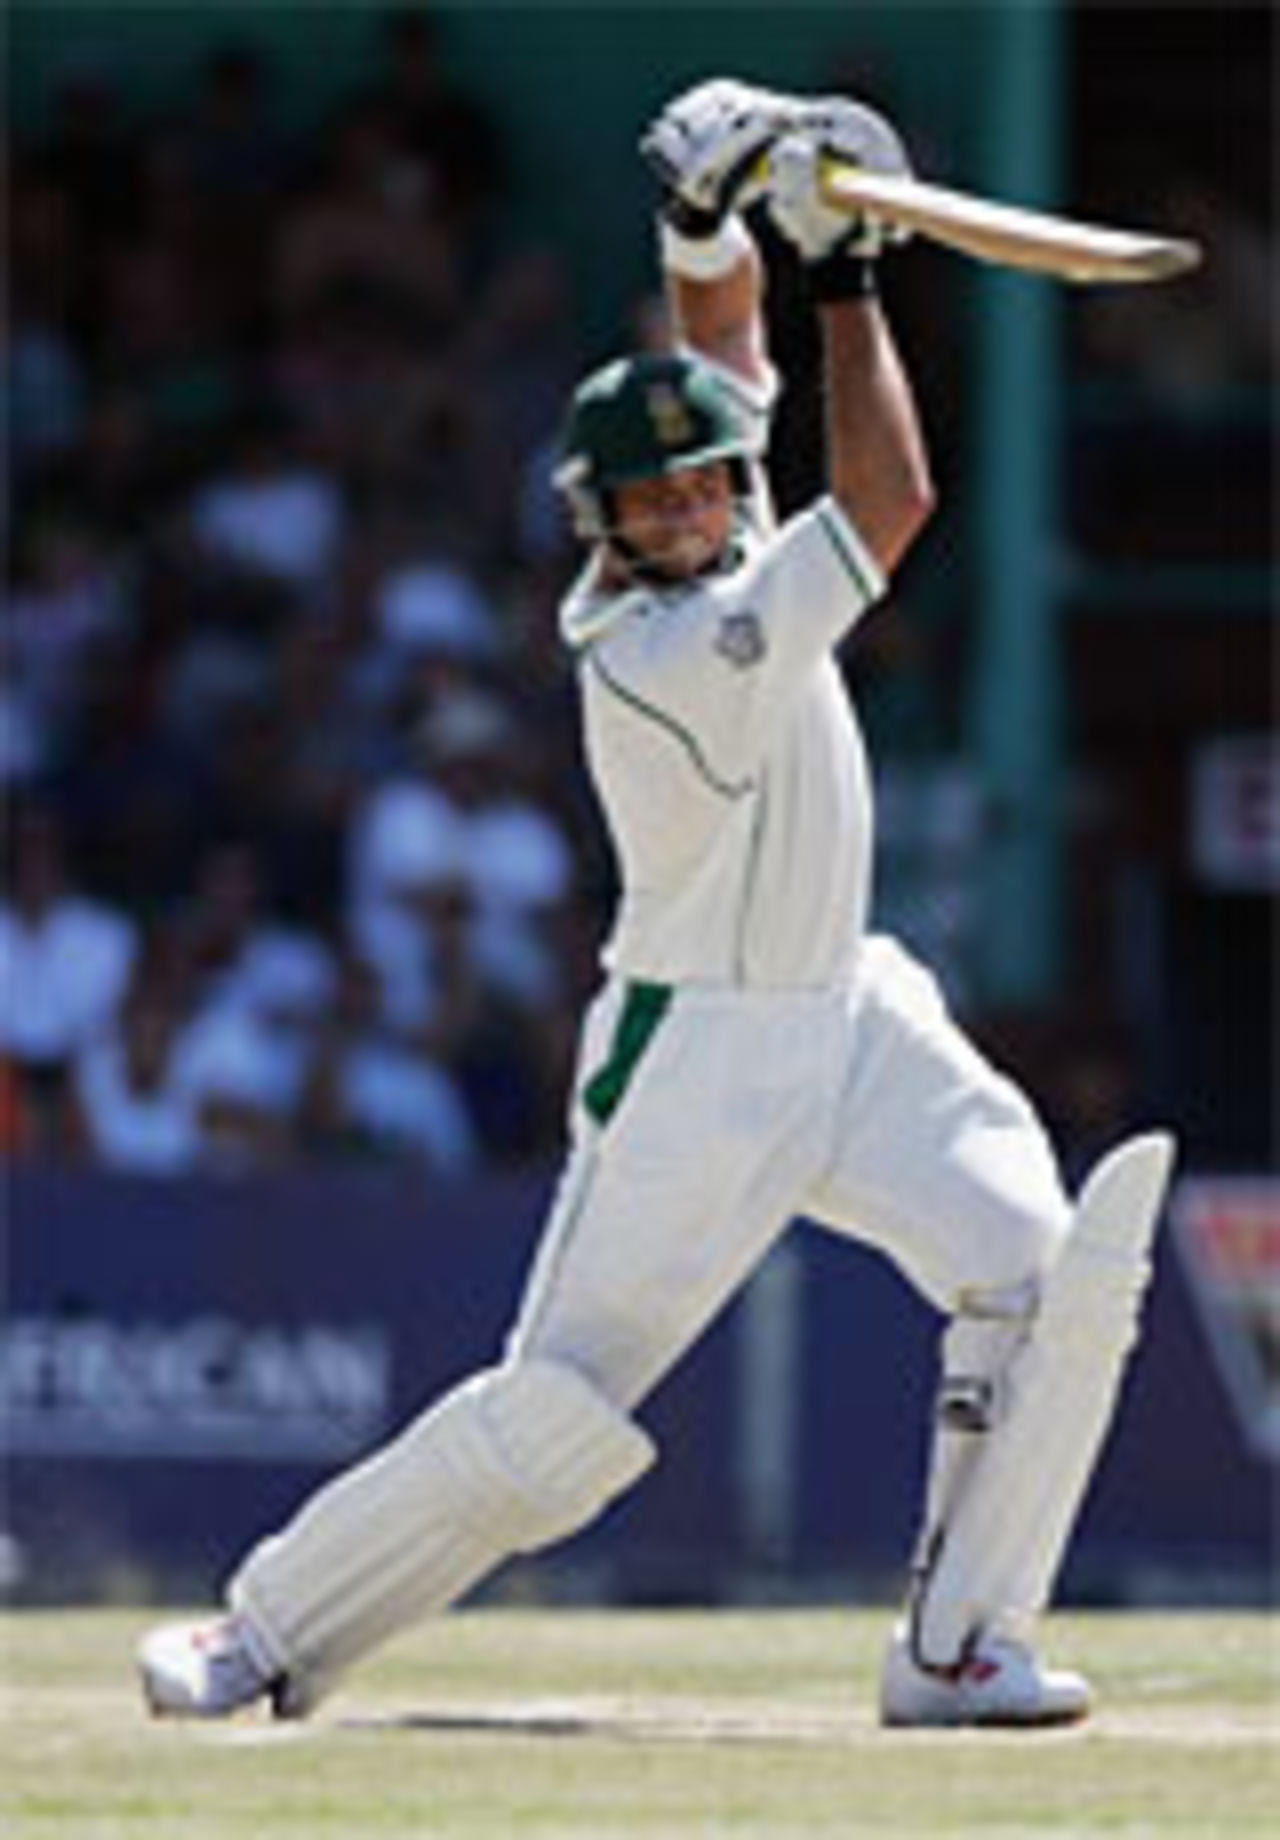 Jacques Kallis hits out on his way to a hundred on the second day of the second Test, Durban, December 27, 2004